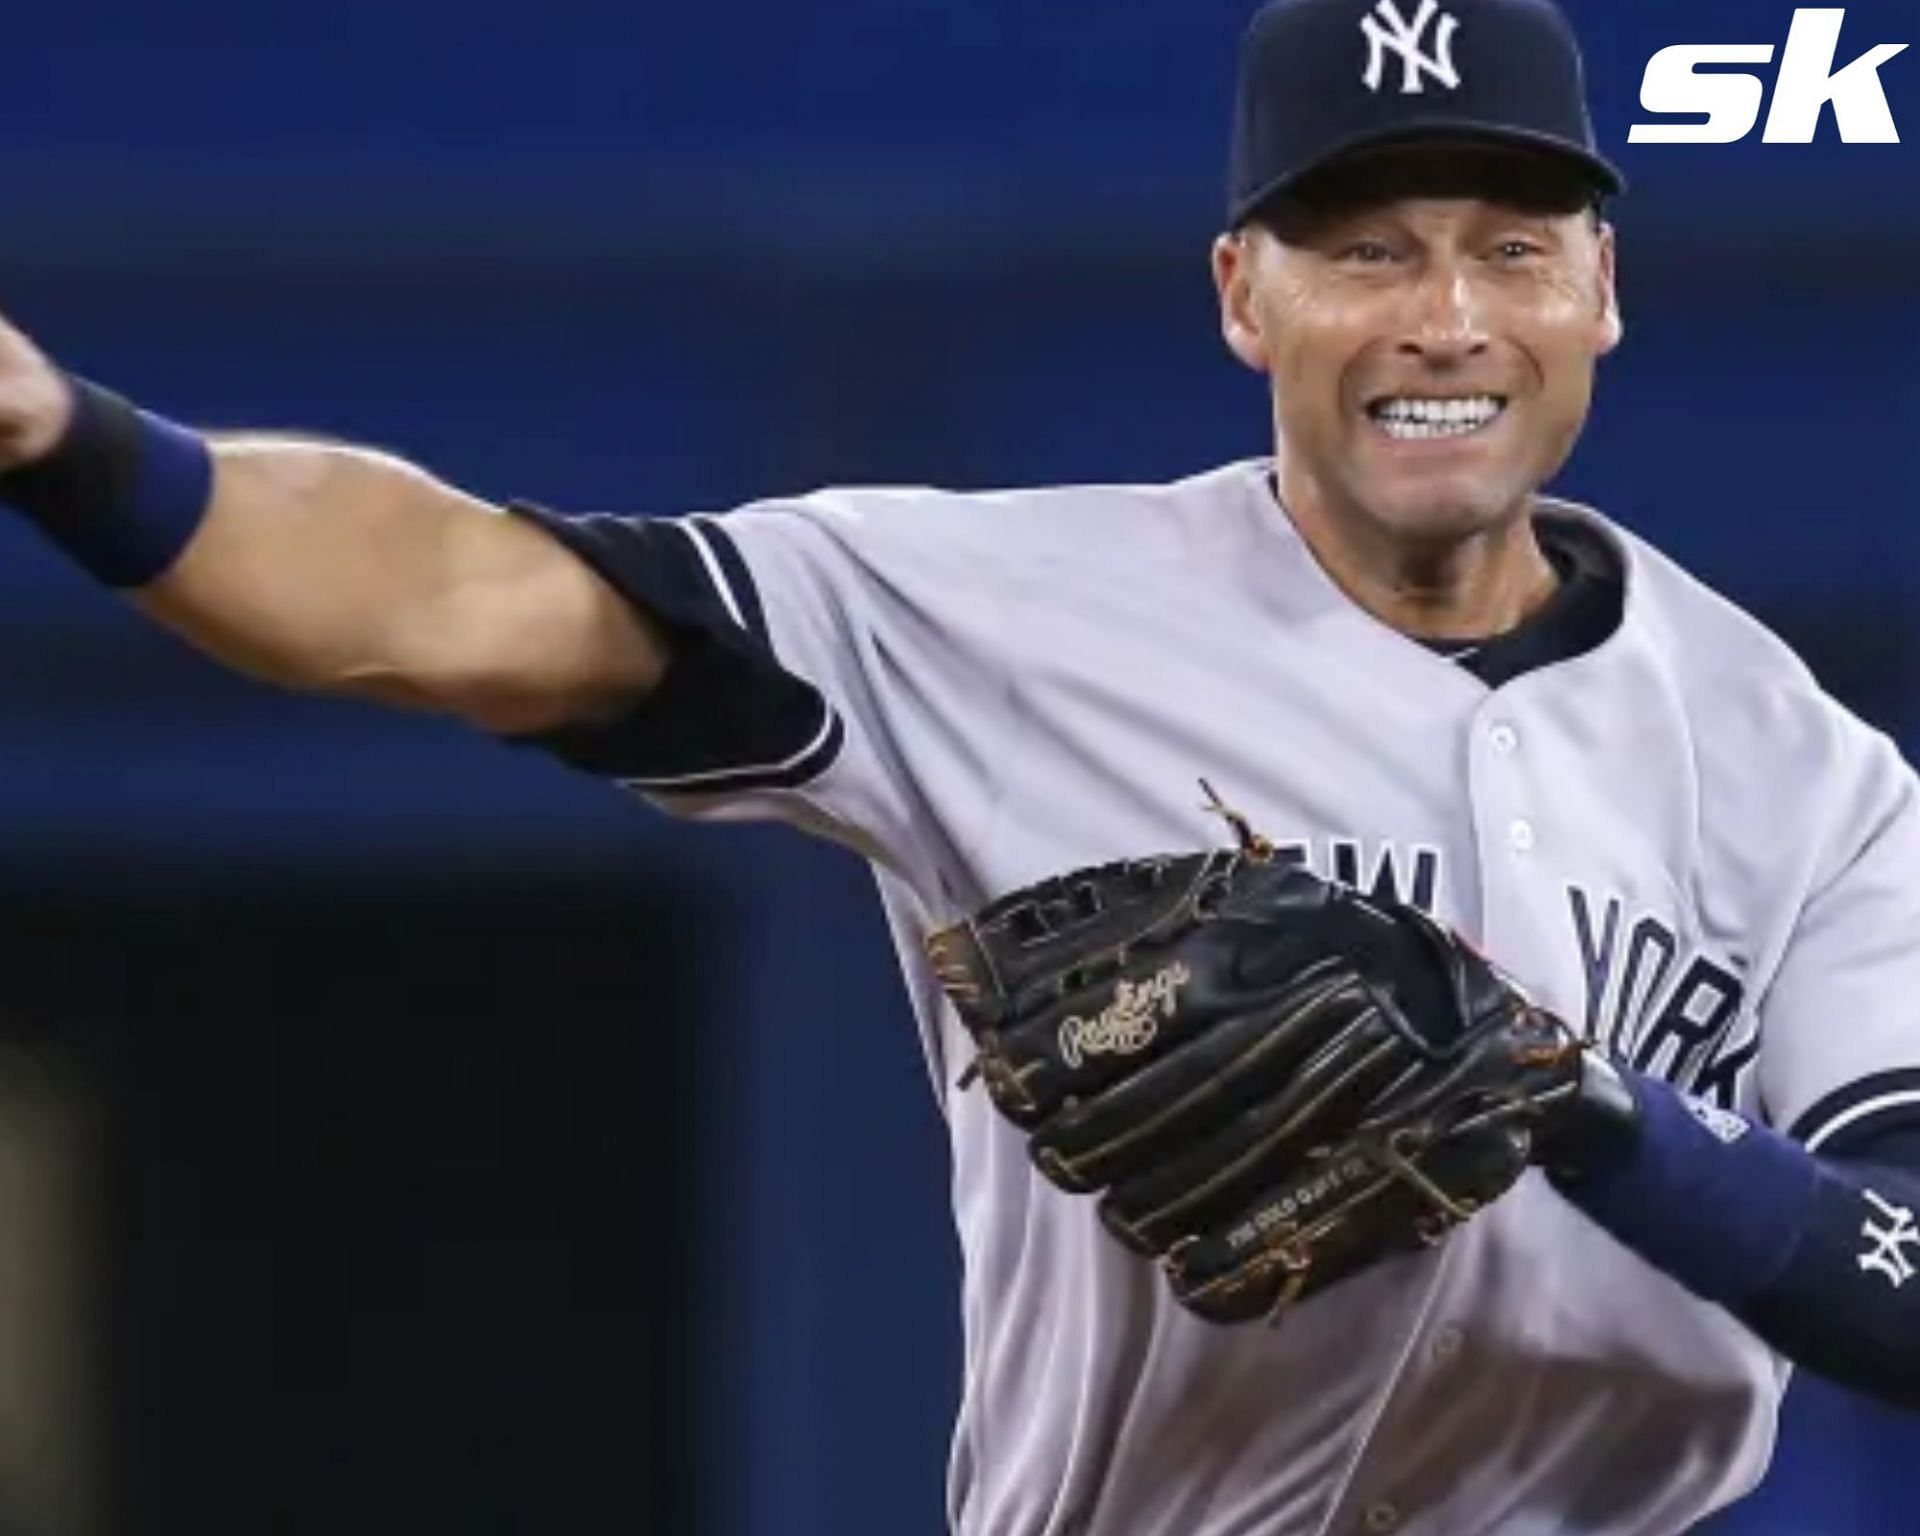 Derek Jeter Welcomes an MLB Legend to the Hall of Fame With